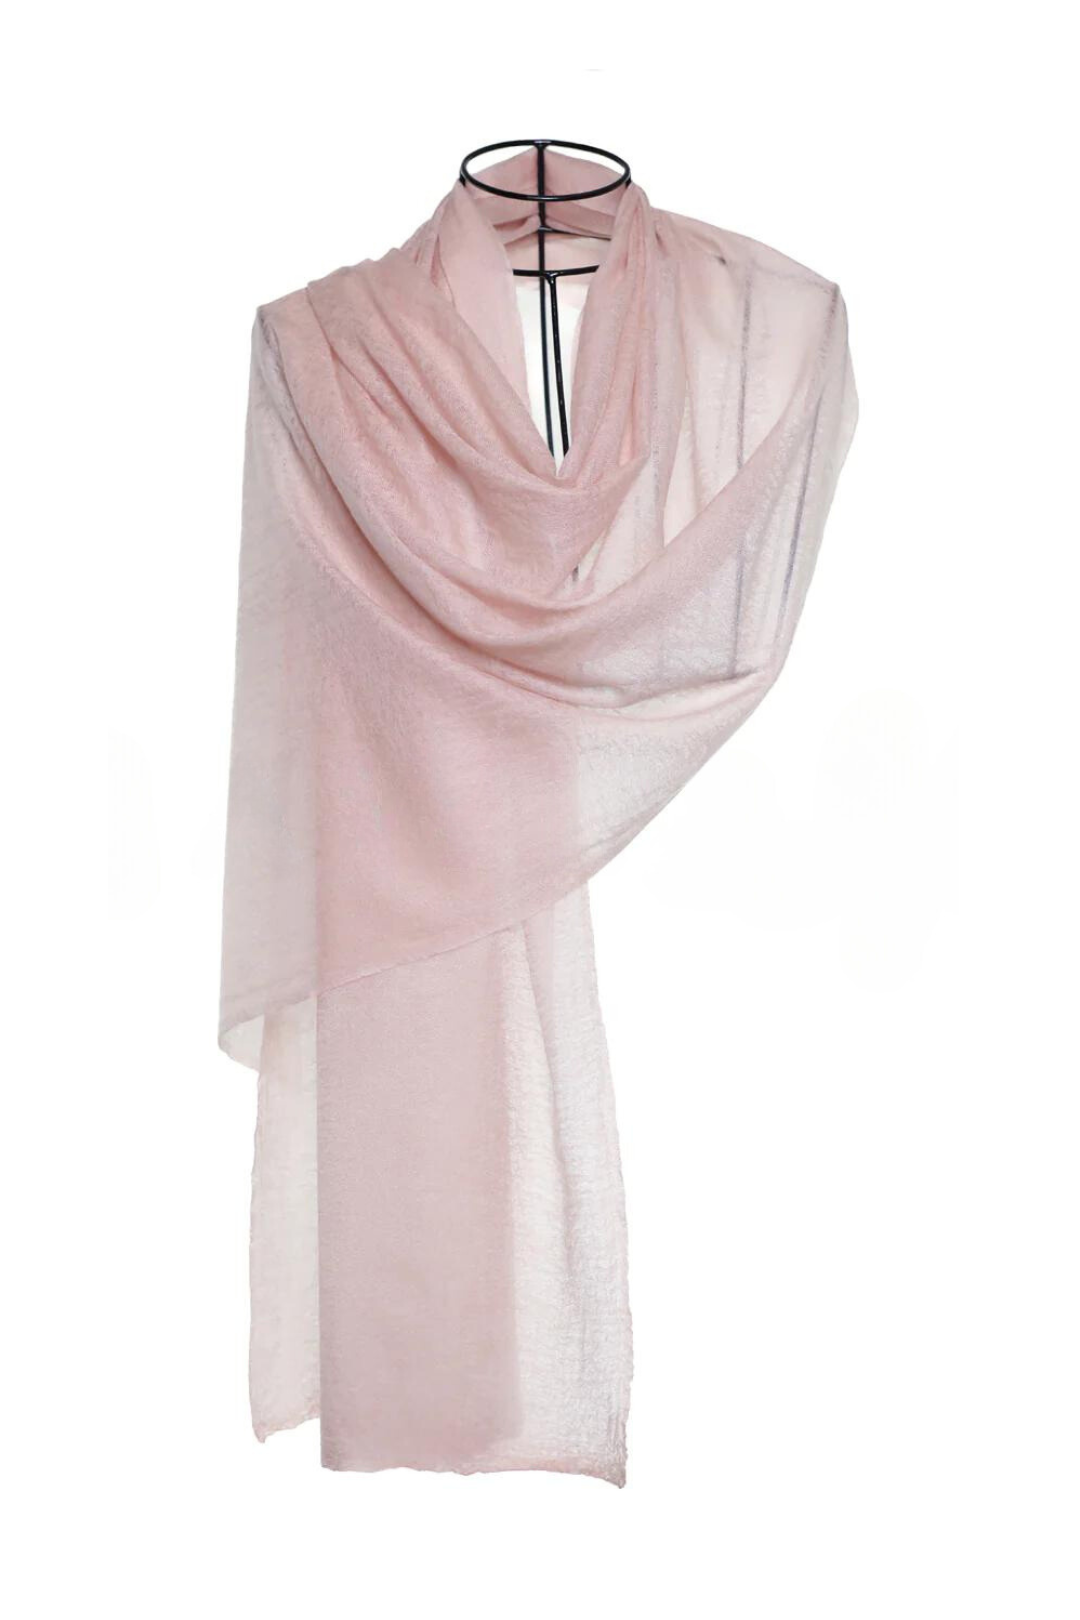 Simply Sparge Micro Baby Cashmere Stole - Pink